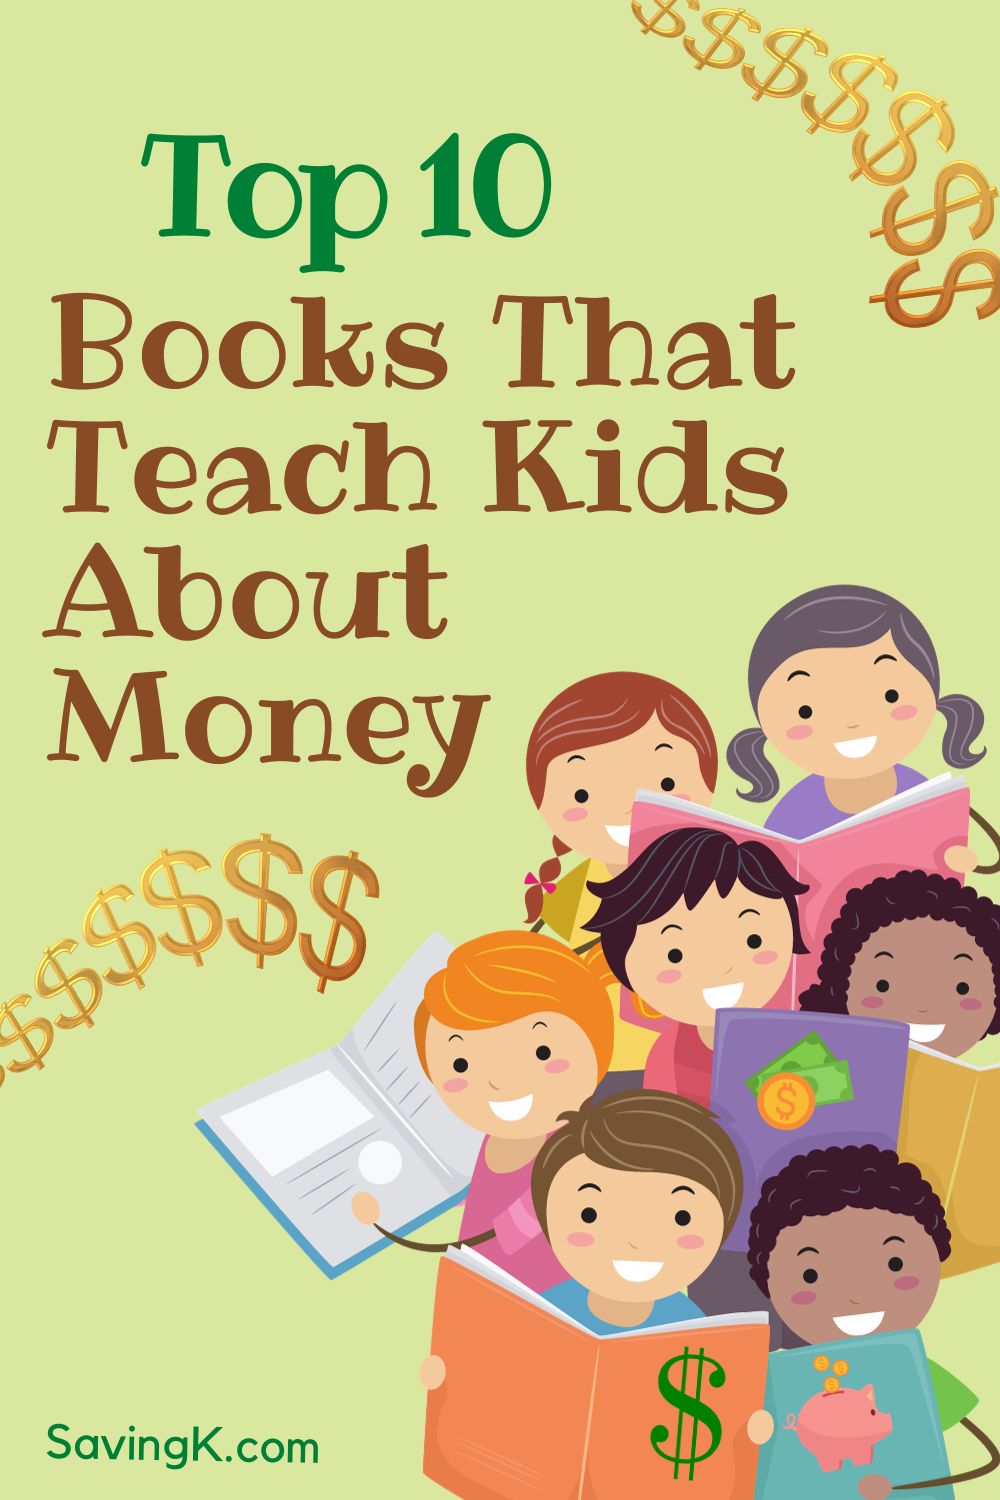 Top 10 Books That Teach Kids About Money